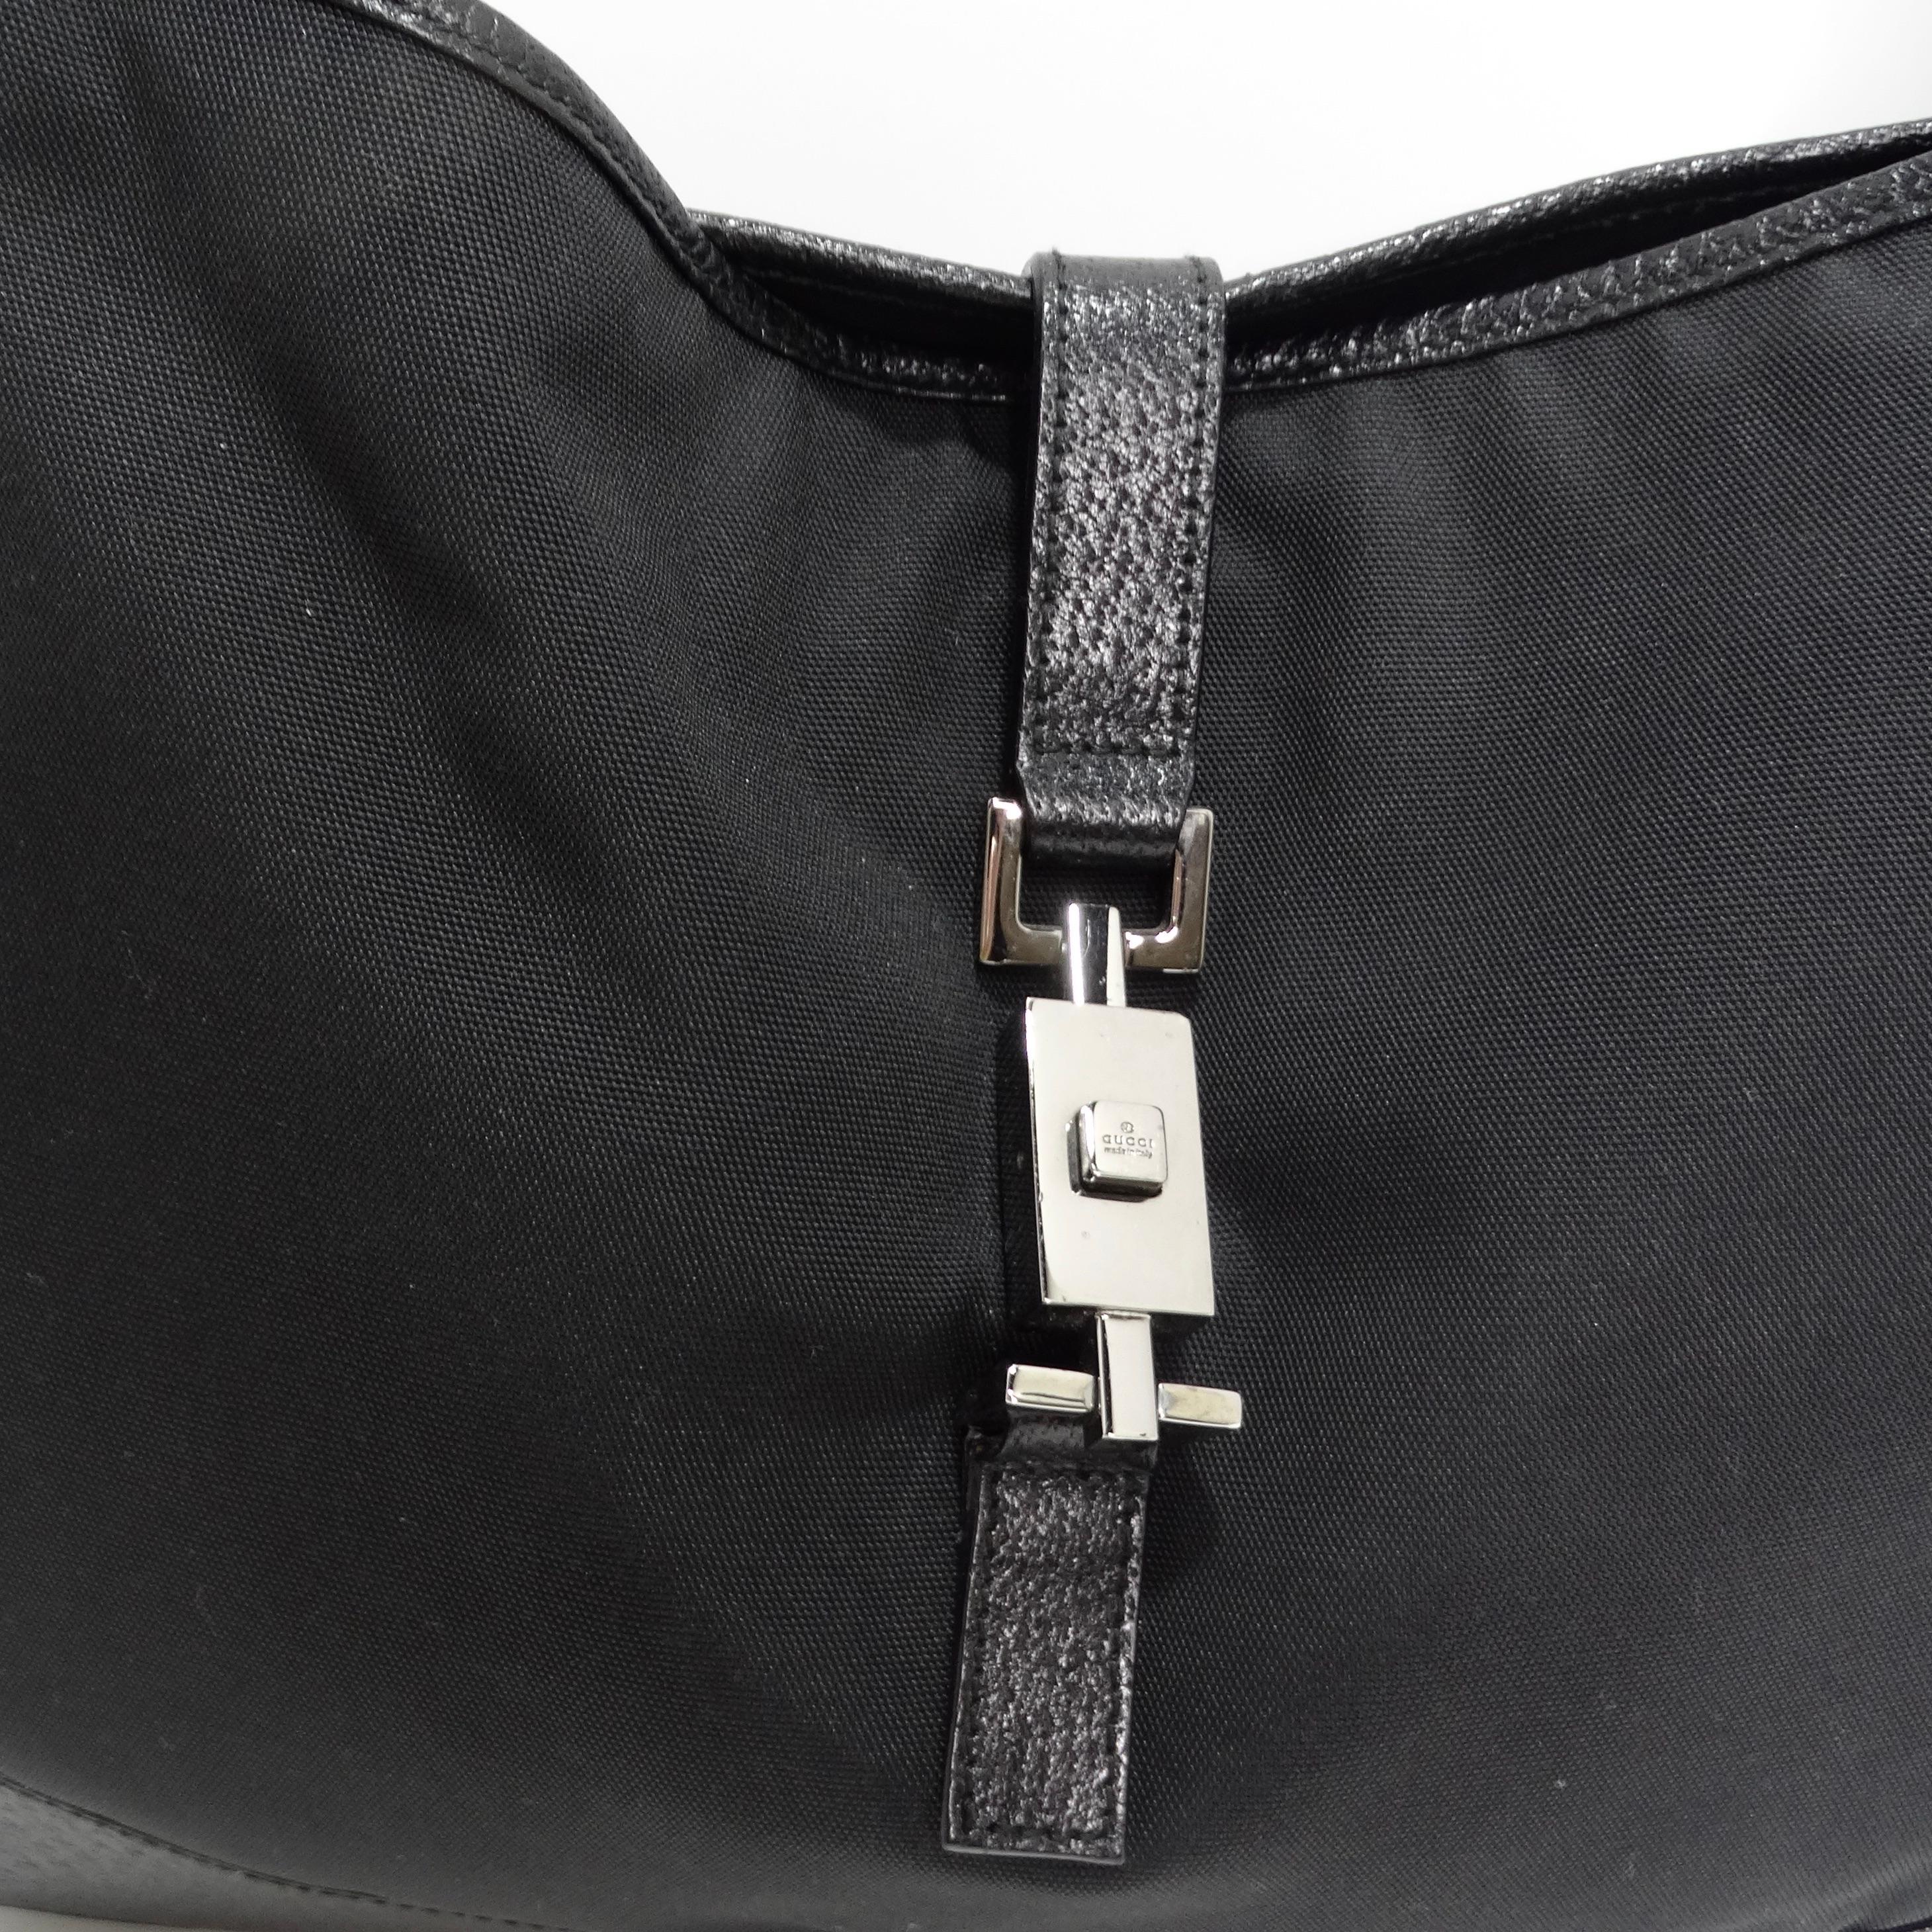 Introducing a handbag that combines iconic style with practicality - the Gucci by Tom Ford Jackie O Nylon Handbag in Classic Black. This hobo shoulder bag is a testament to timeless design and quality, making it an ideal choice for your everyday